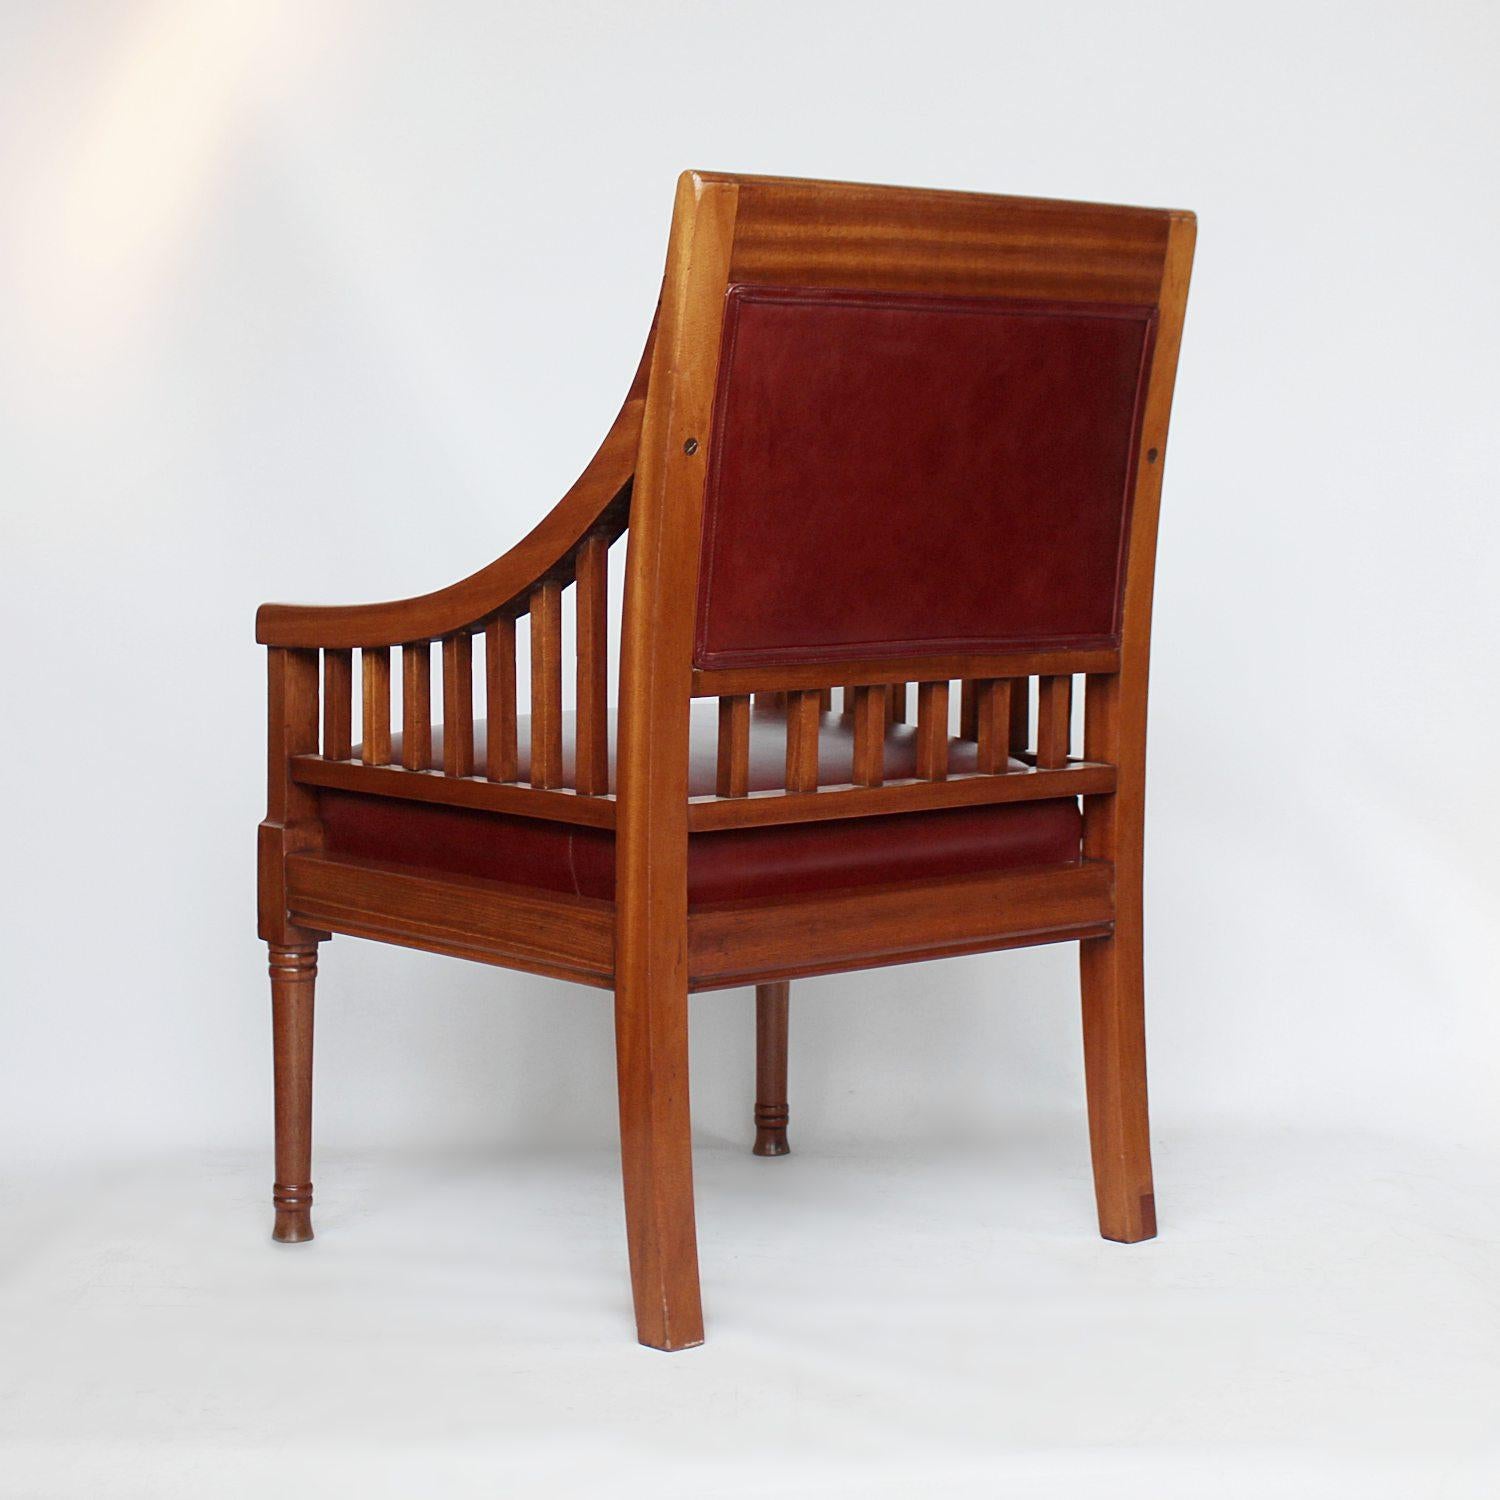 English Pair of Arts & Crafts Armchairs